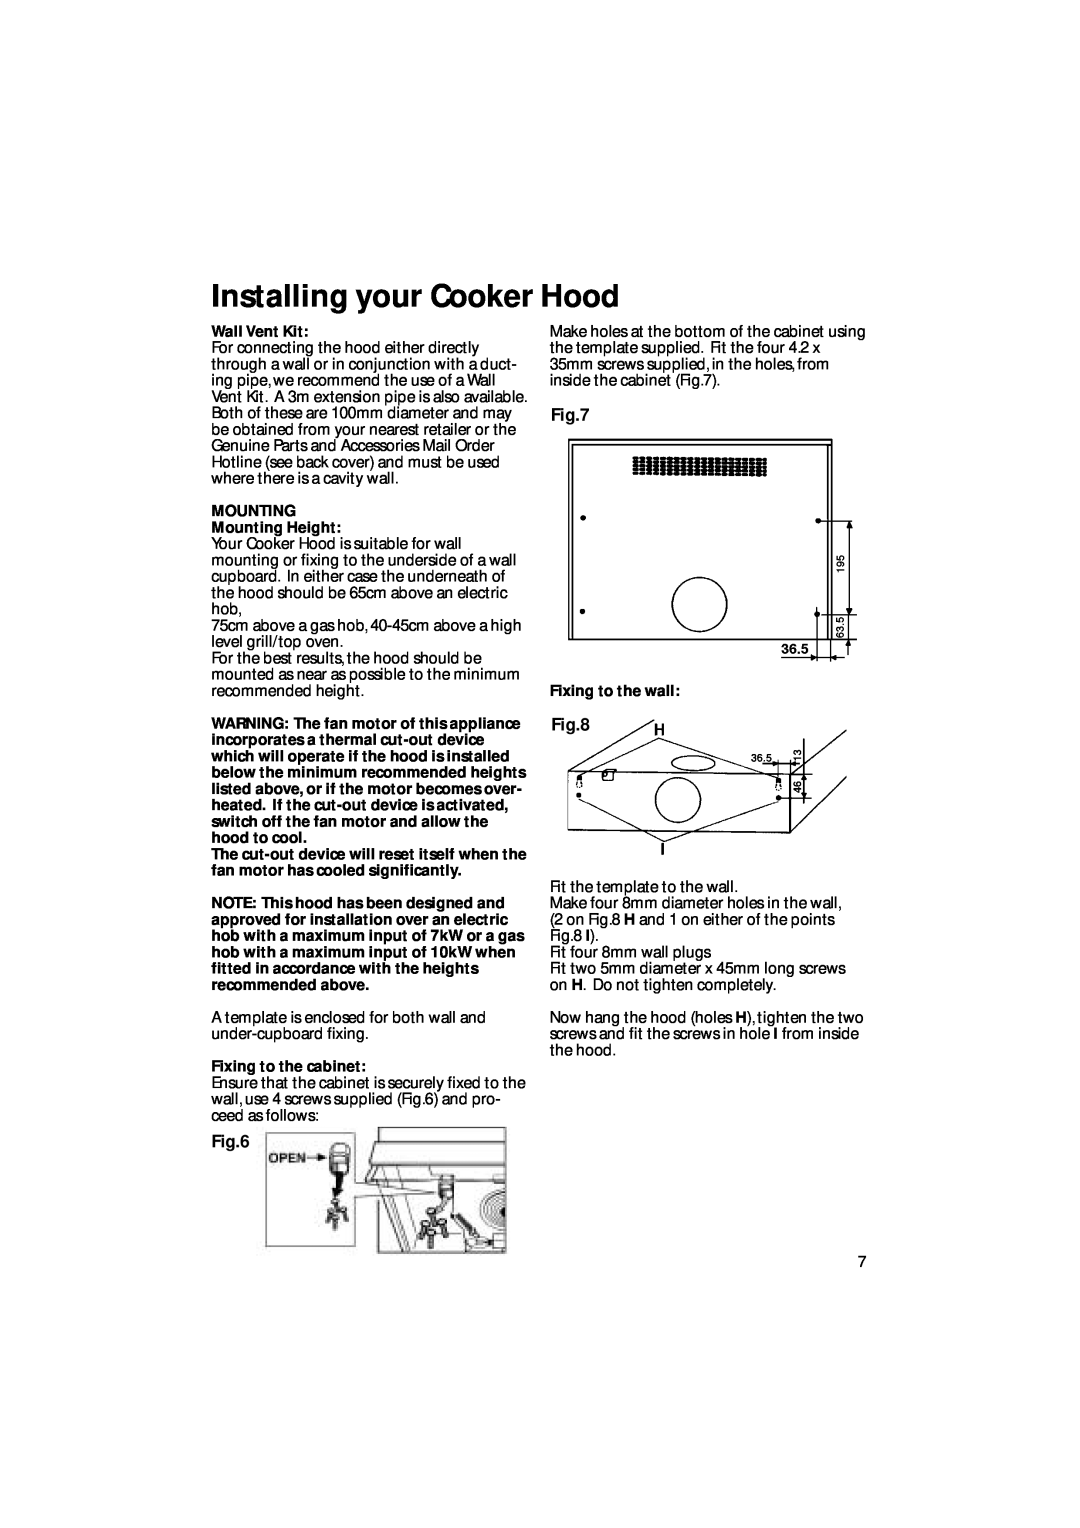 Creda CRV10 manual Installing your Cooker Hood, Wall Vent Kit, MOUNTING Mounting Height, Fixing to the cabinet 